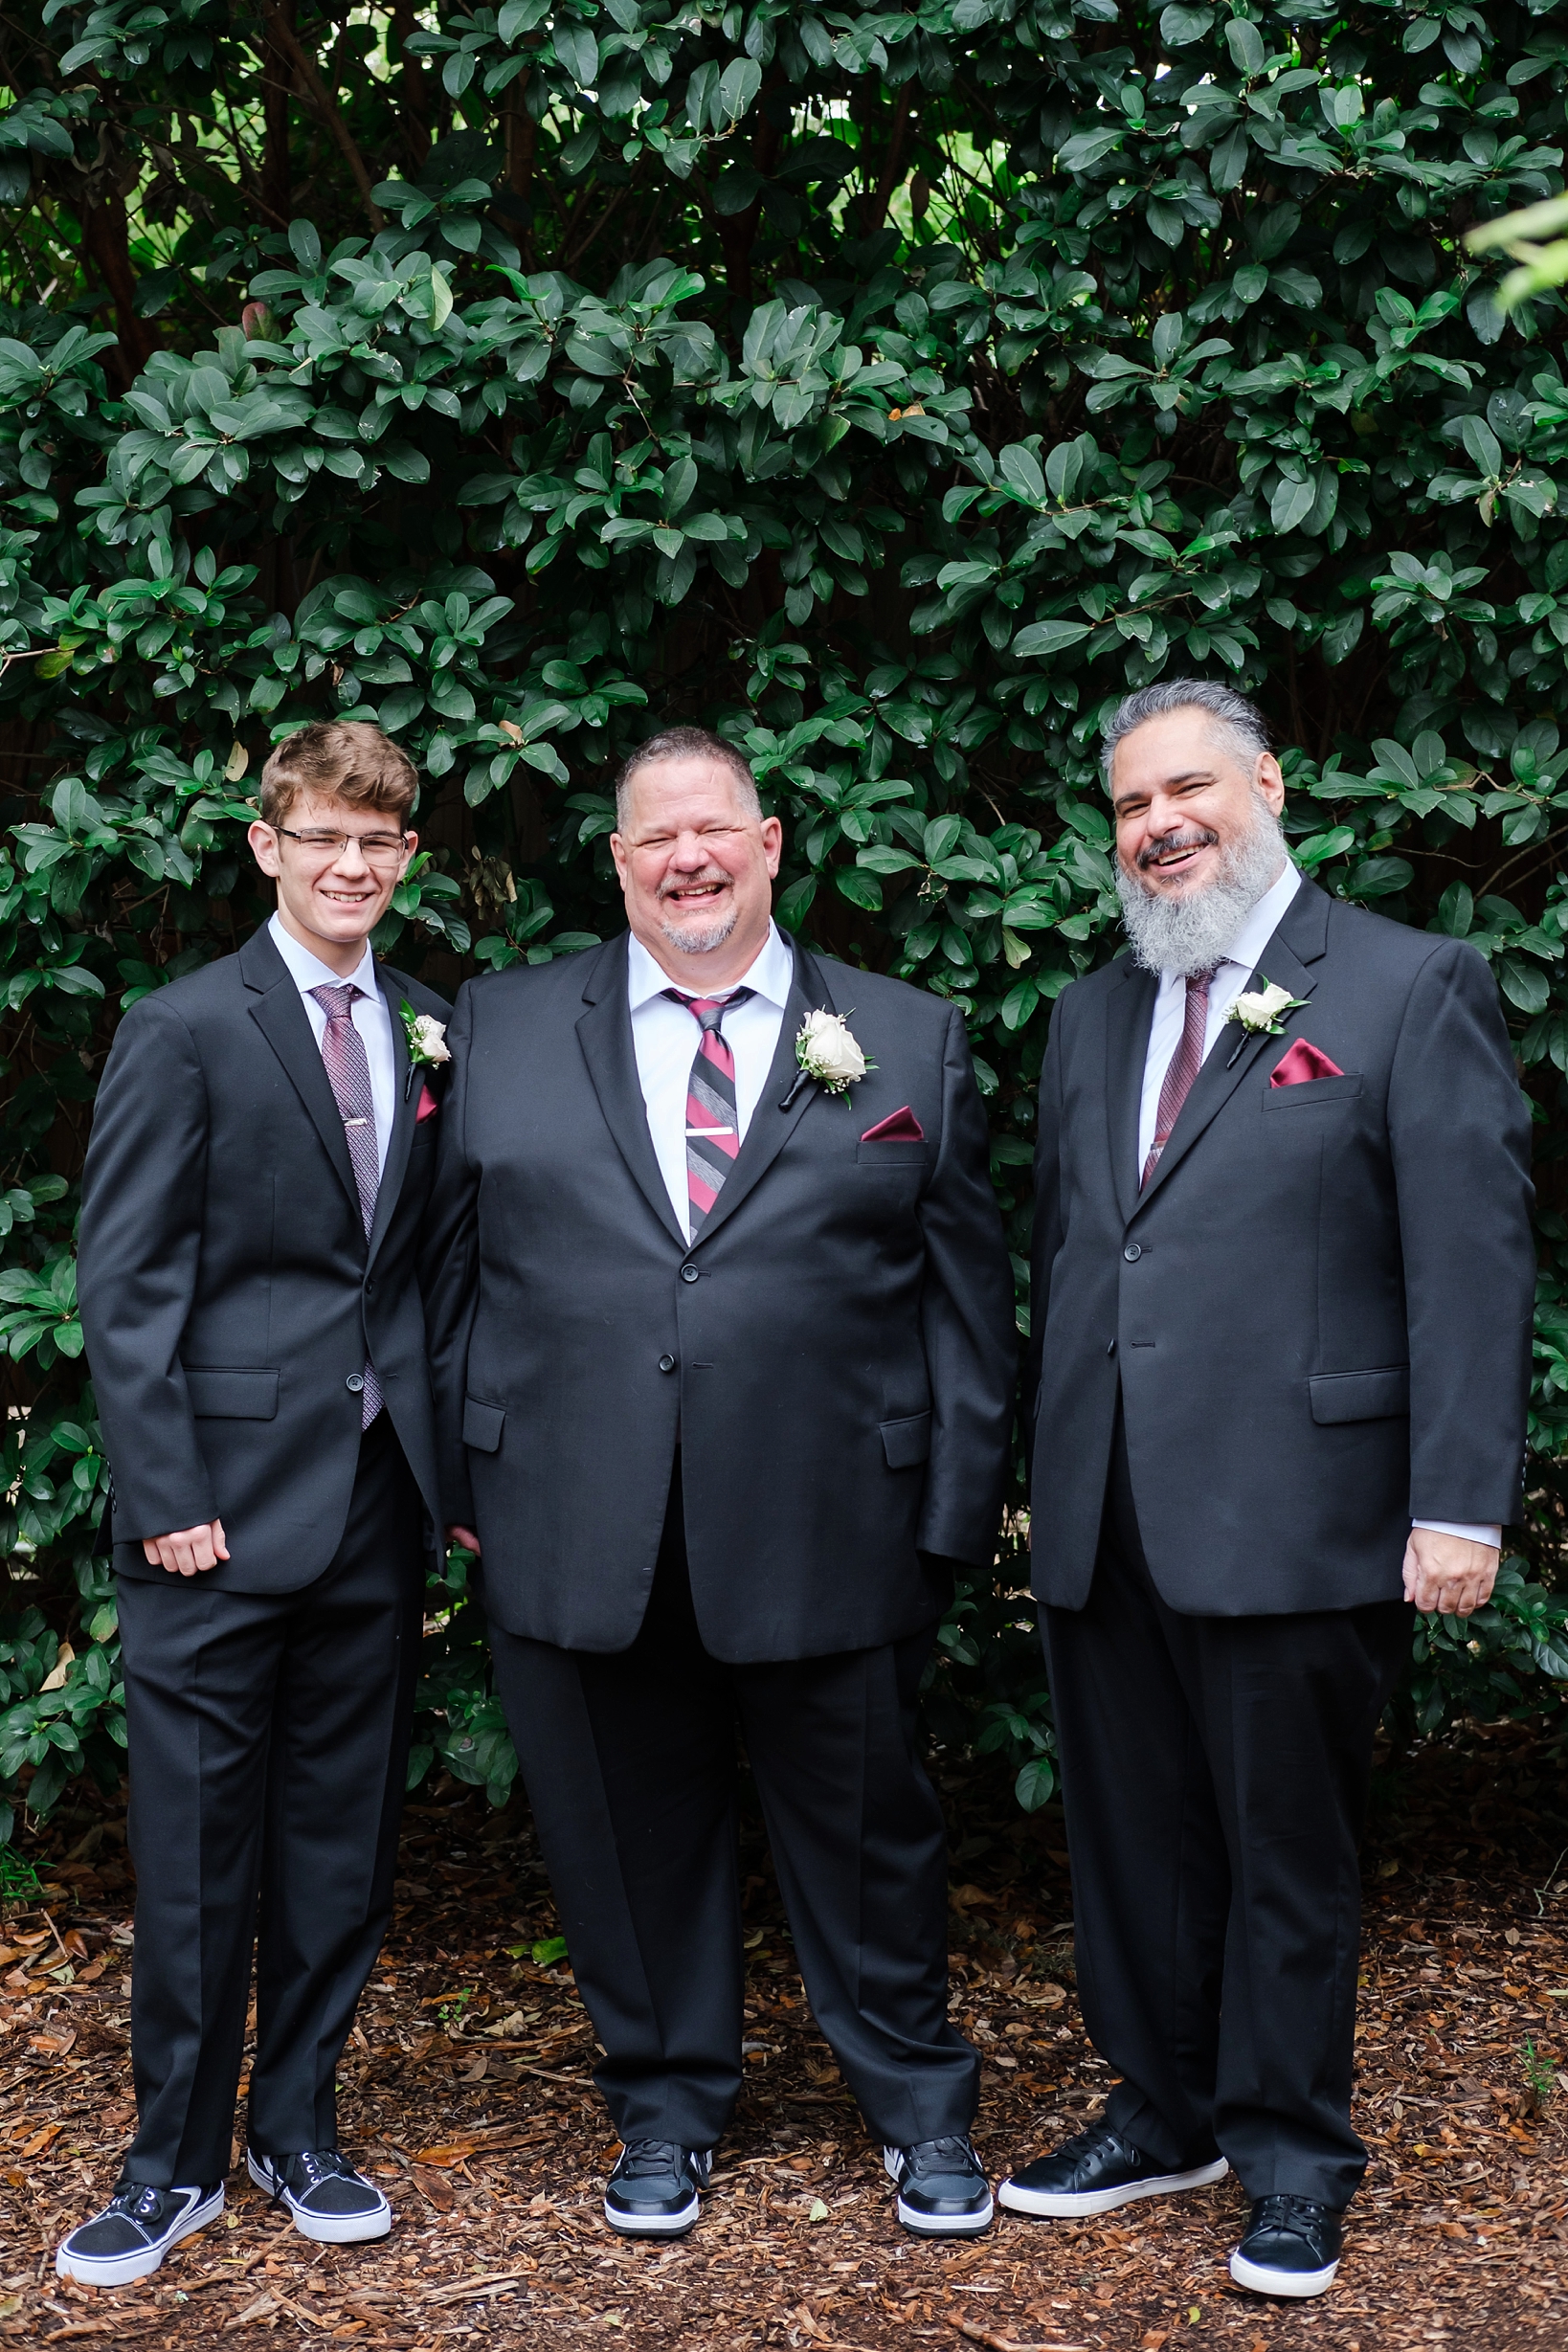 Groom and his Groomsmen in suits and sneakers pose for a formal portrait in front of large greenery